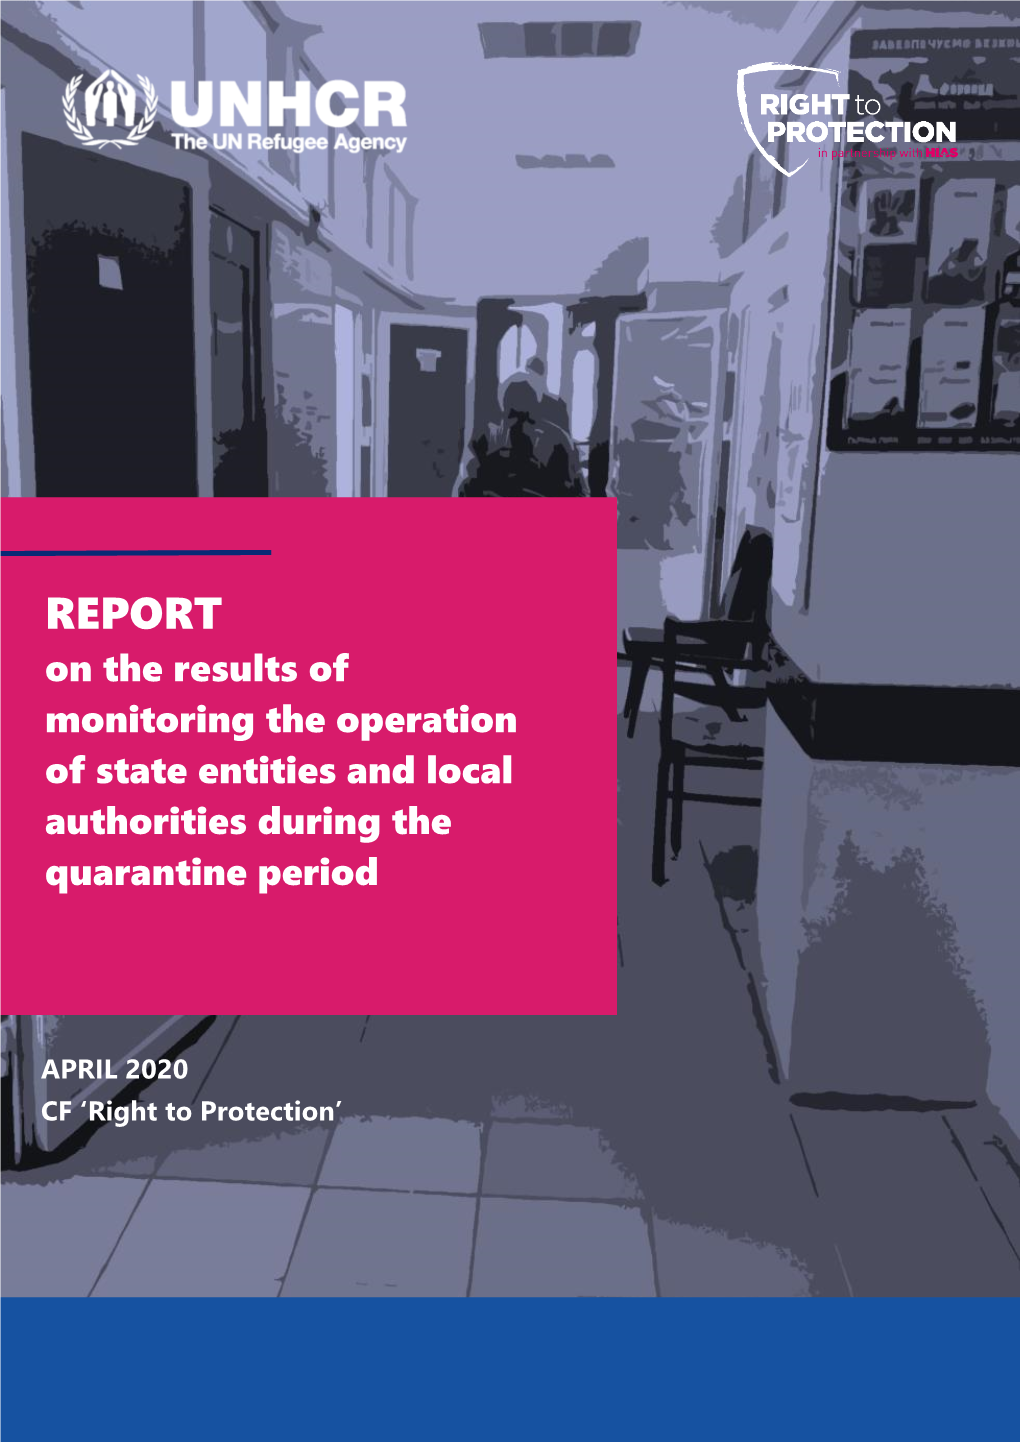 REPORT on the Results of Monitoring the Operation of State Entities and Local Authorities During the Quarantine Period